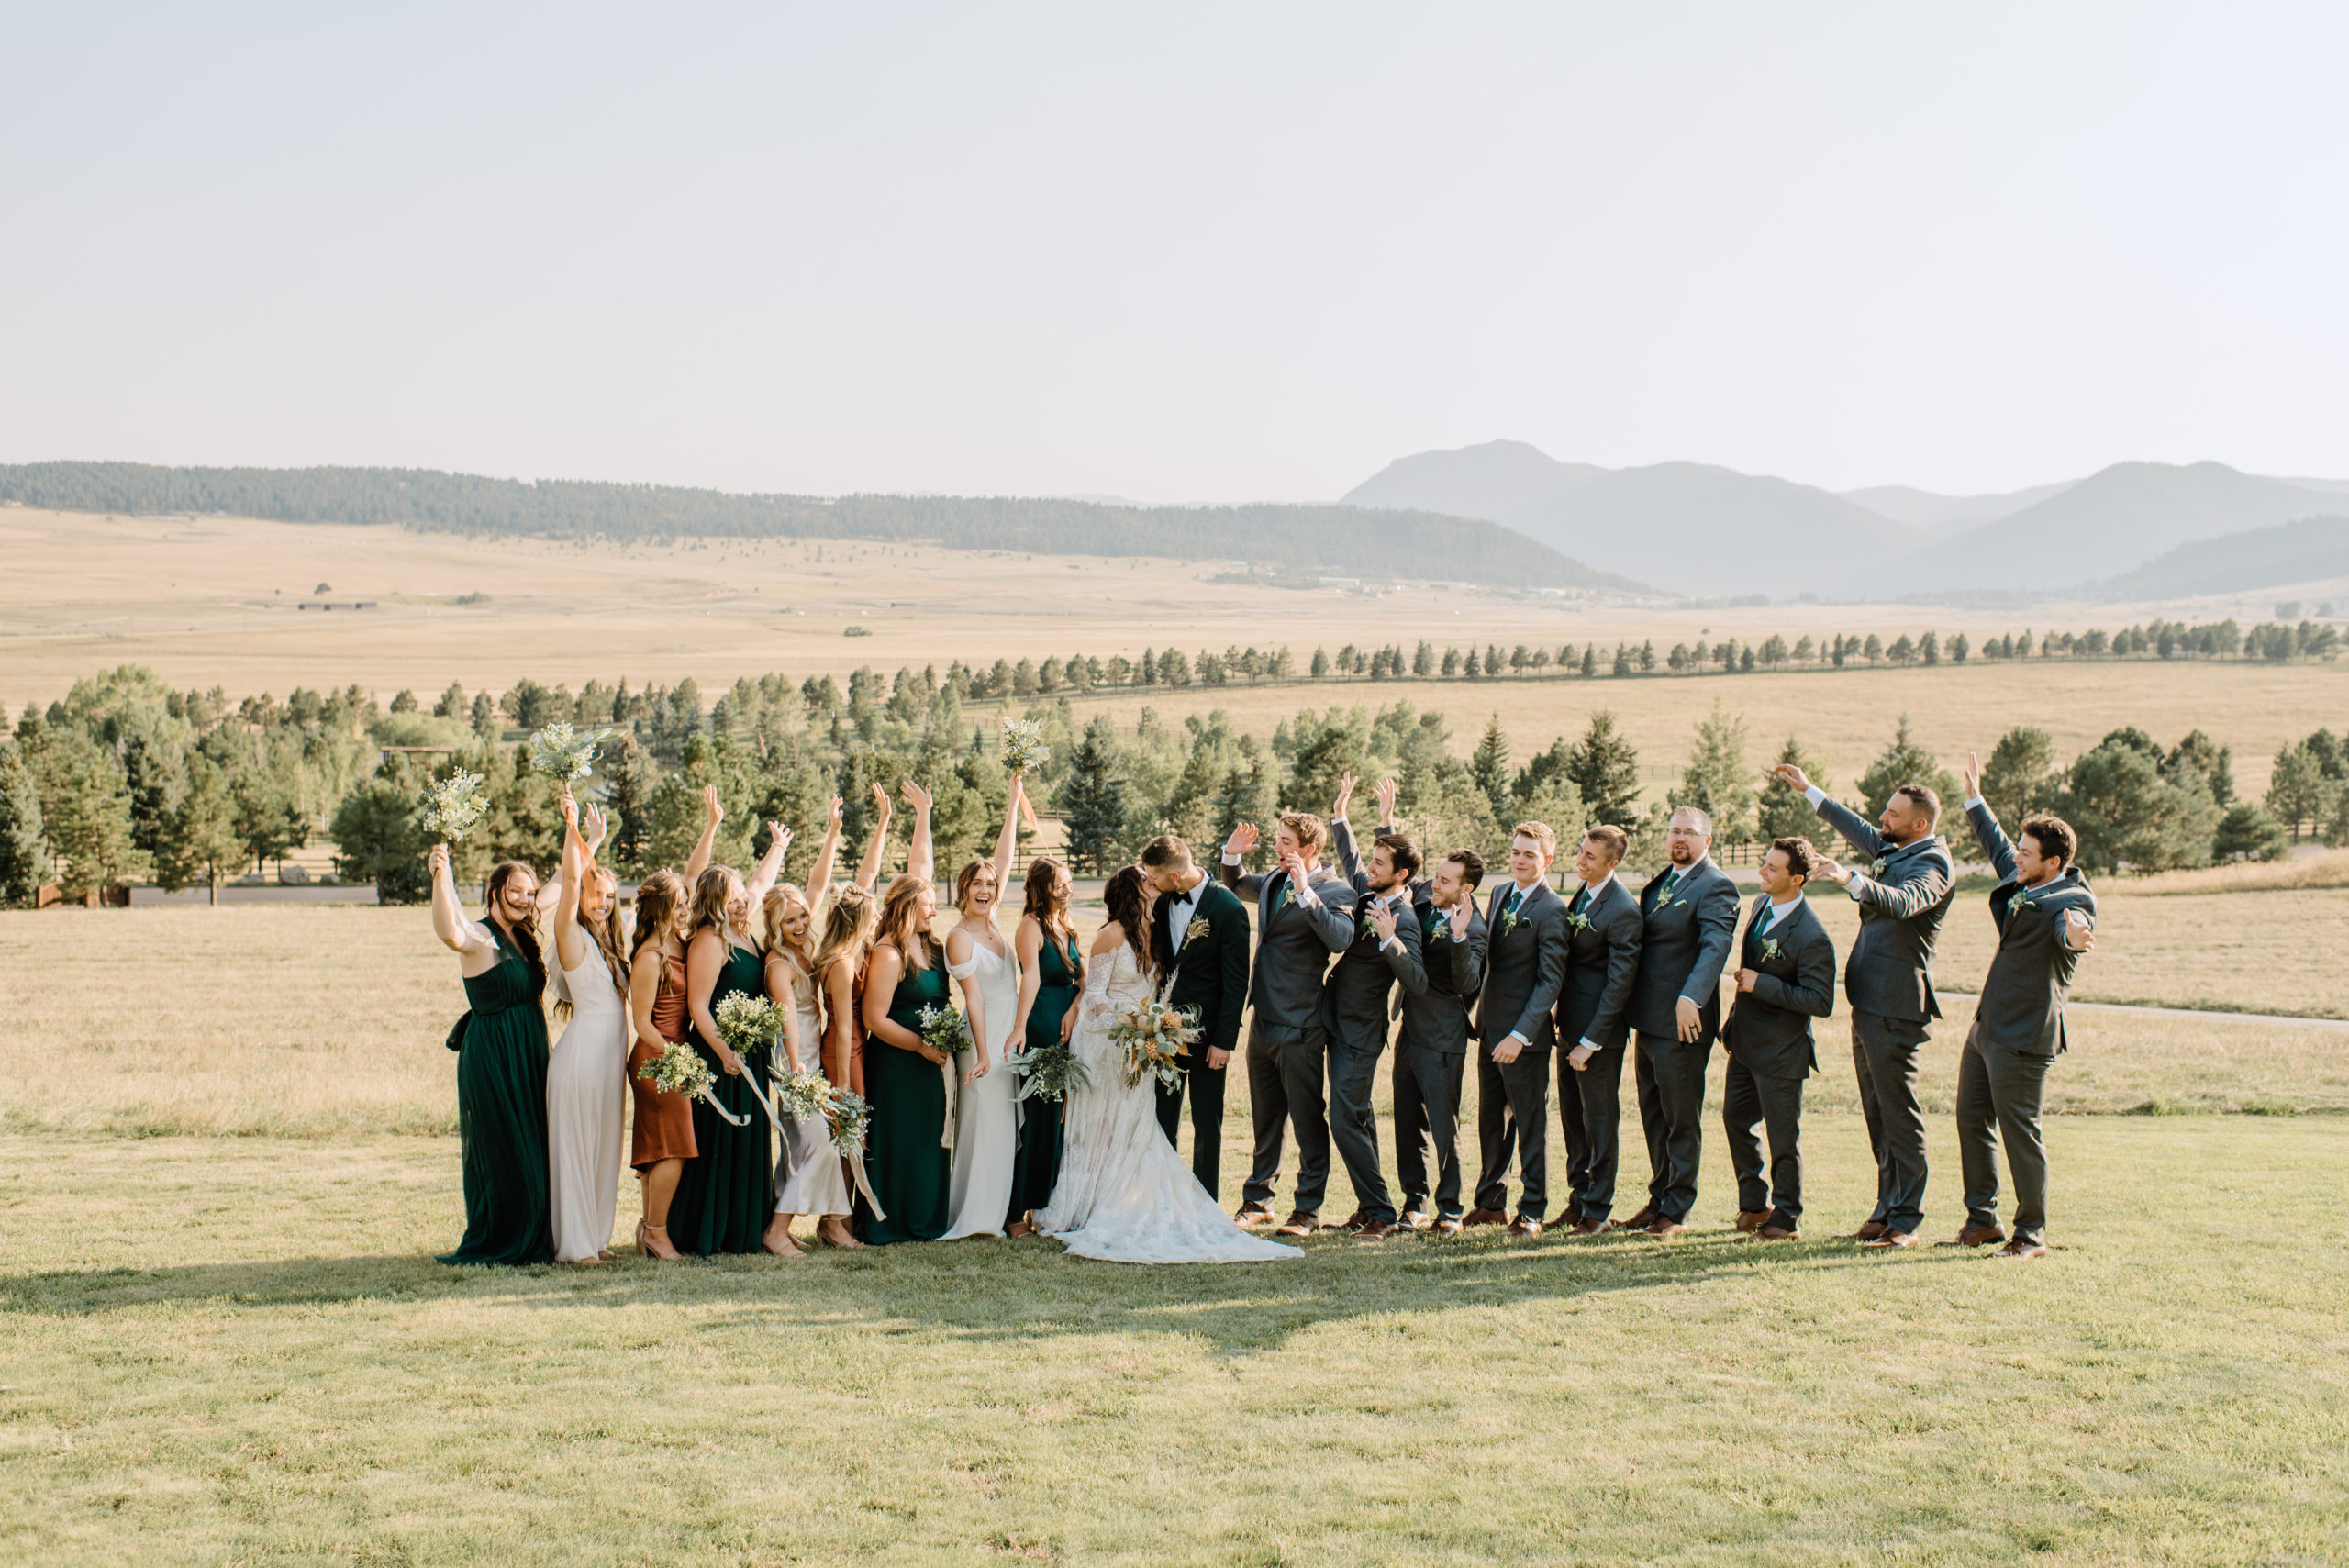 The bride and groom with the whole wedding party before the Spruce Mountain Ranch wedding ceremony 